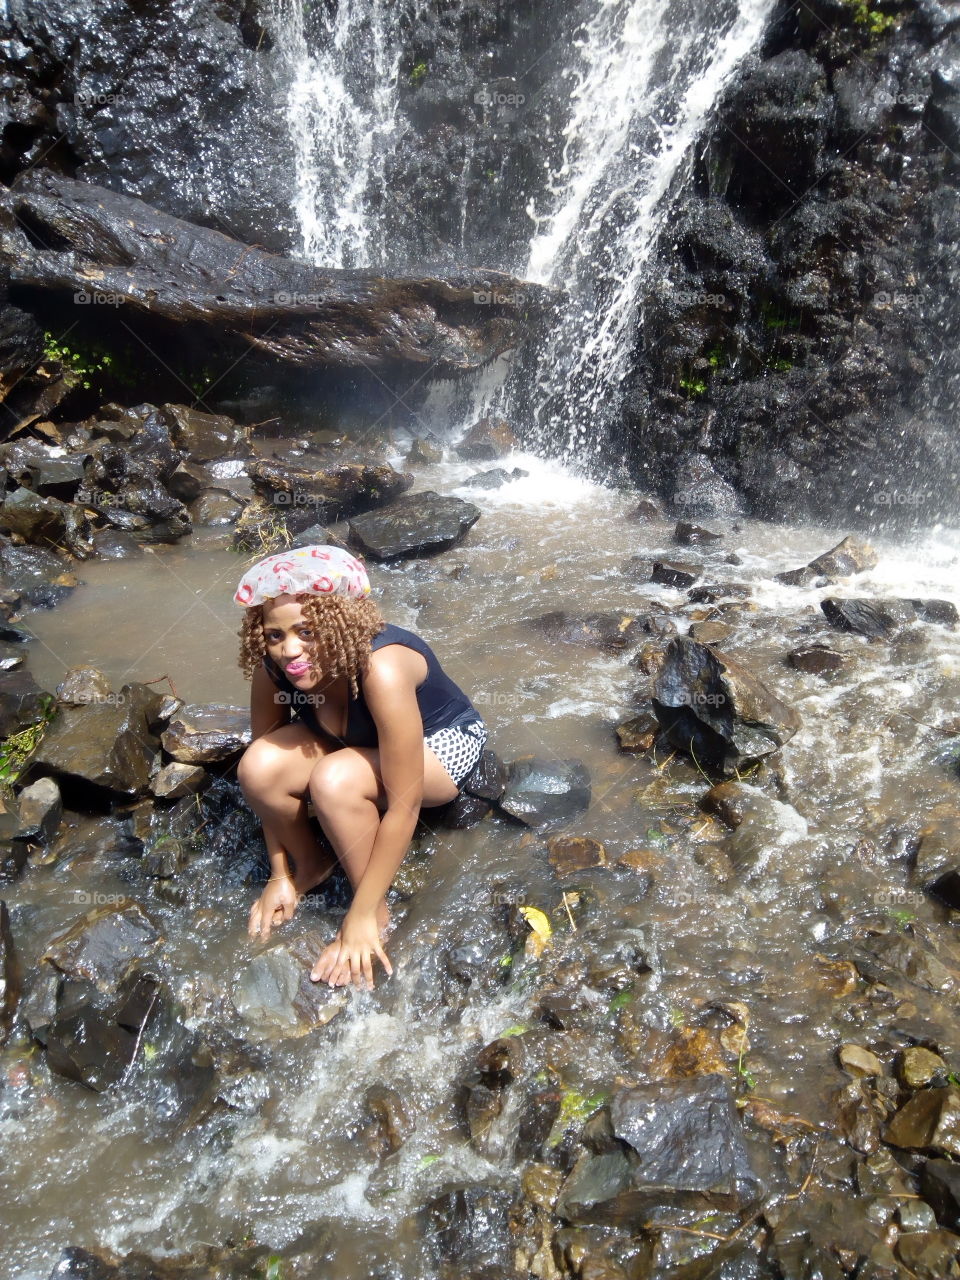 This photo was taken in a waterfall located  deep forest of mount Kenya.